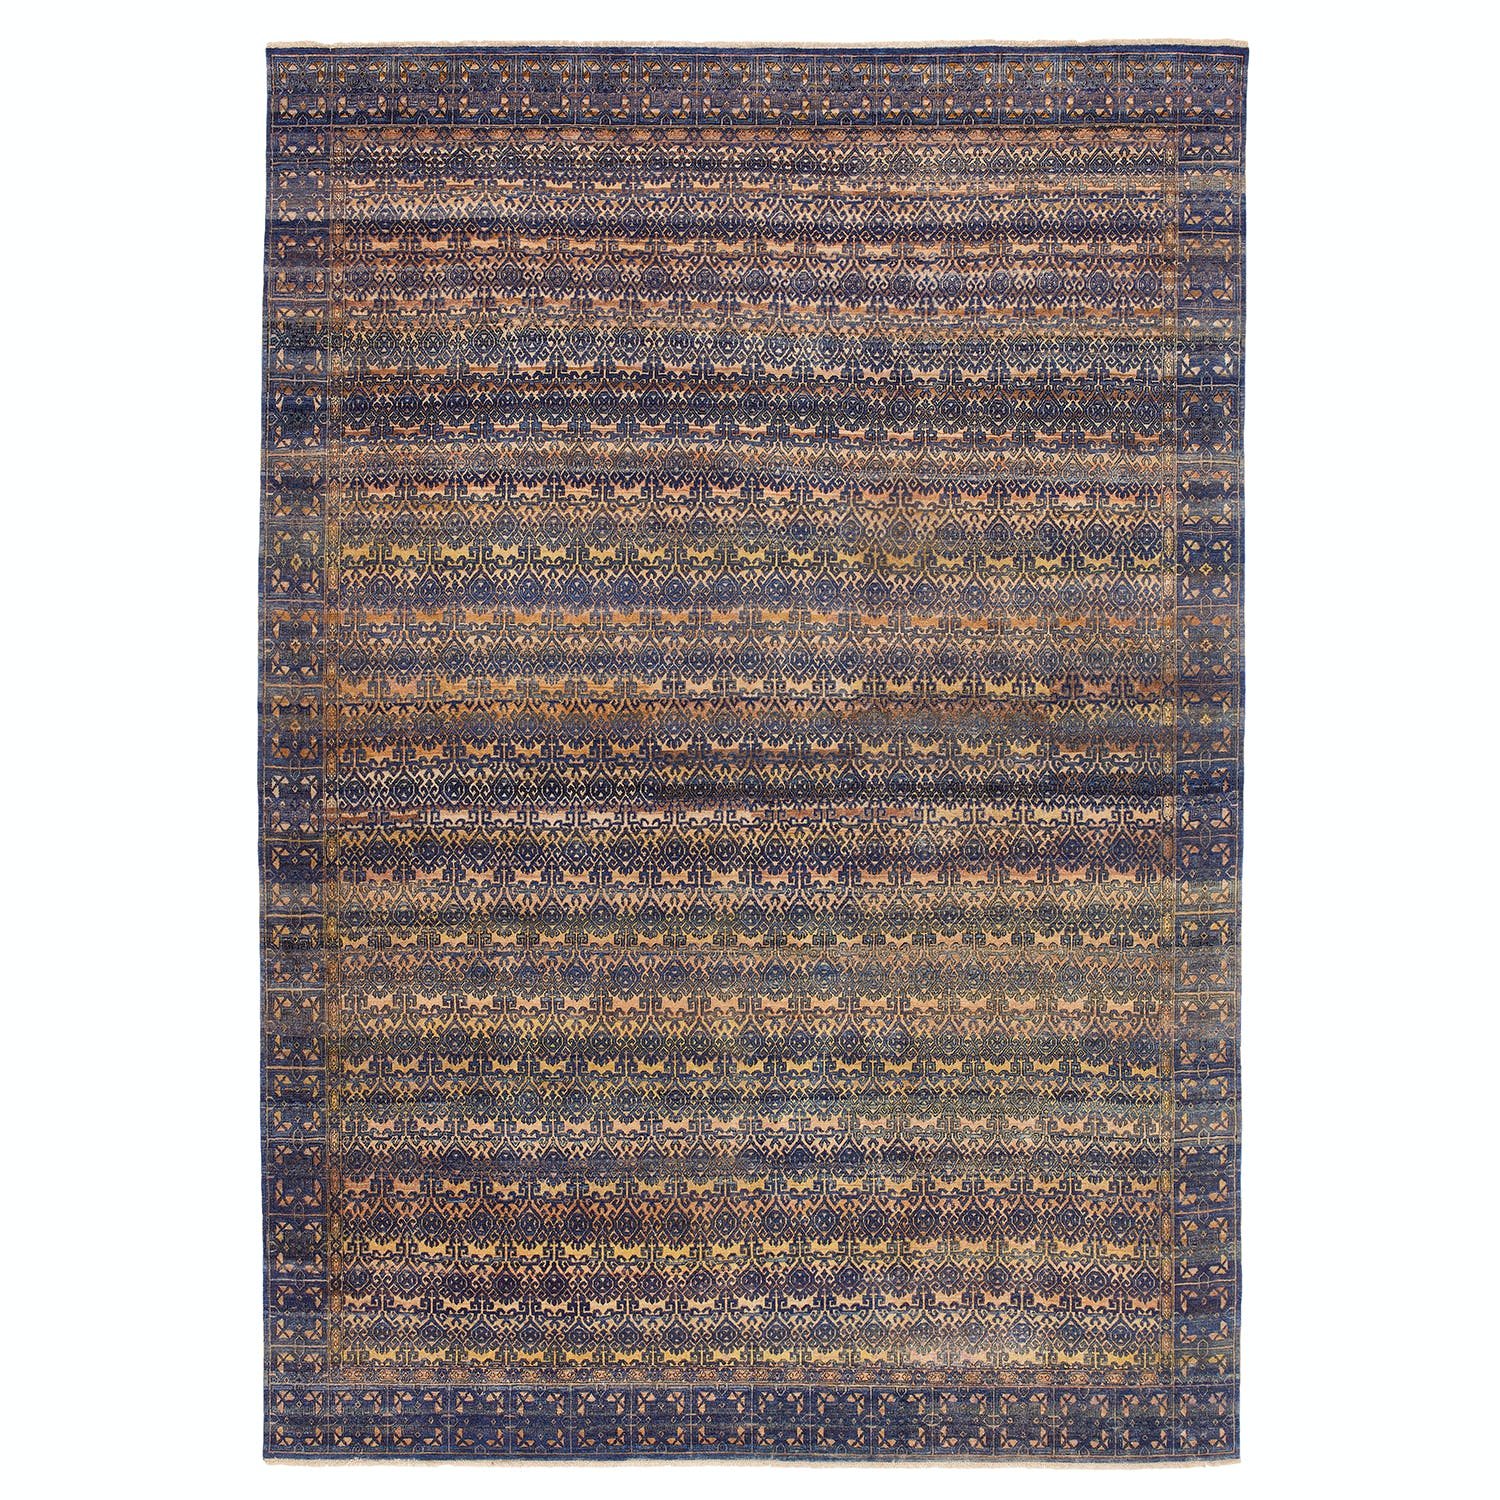 Vintage oriental rug with intricate patterns and muted color scheme.